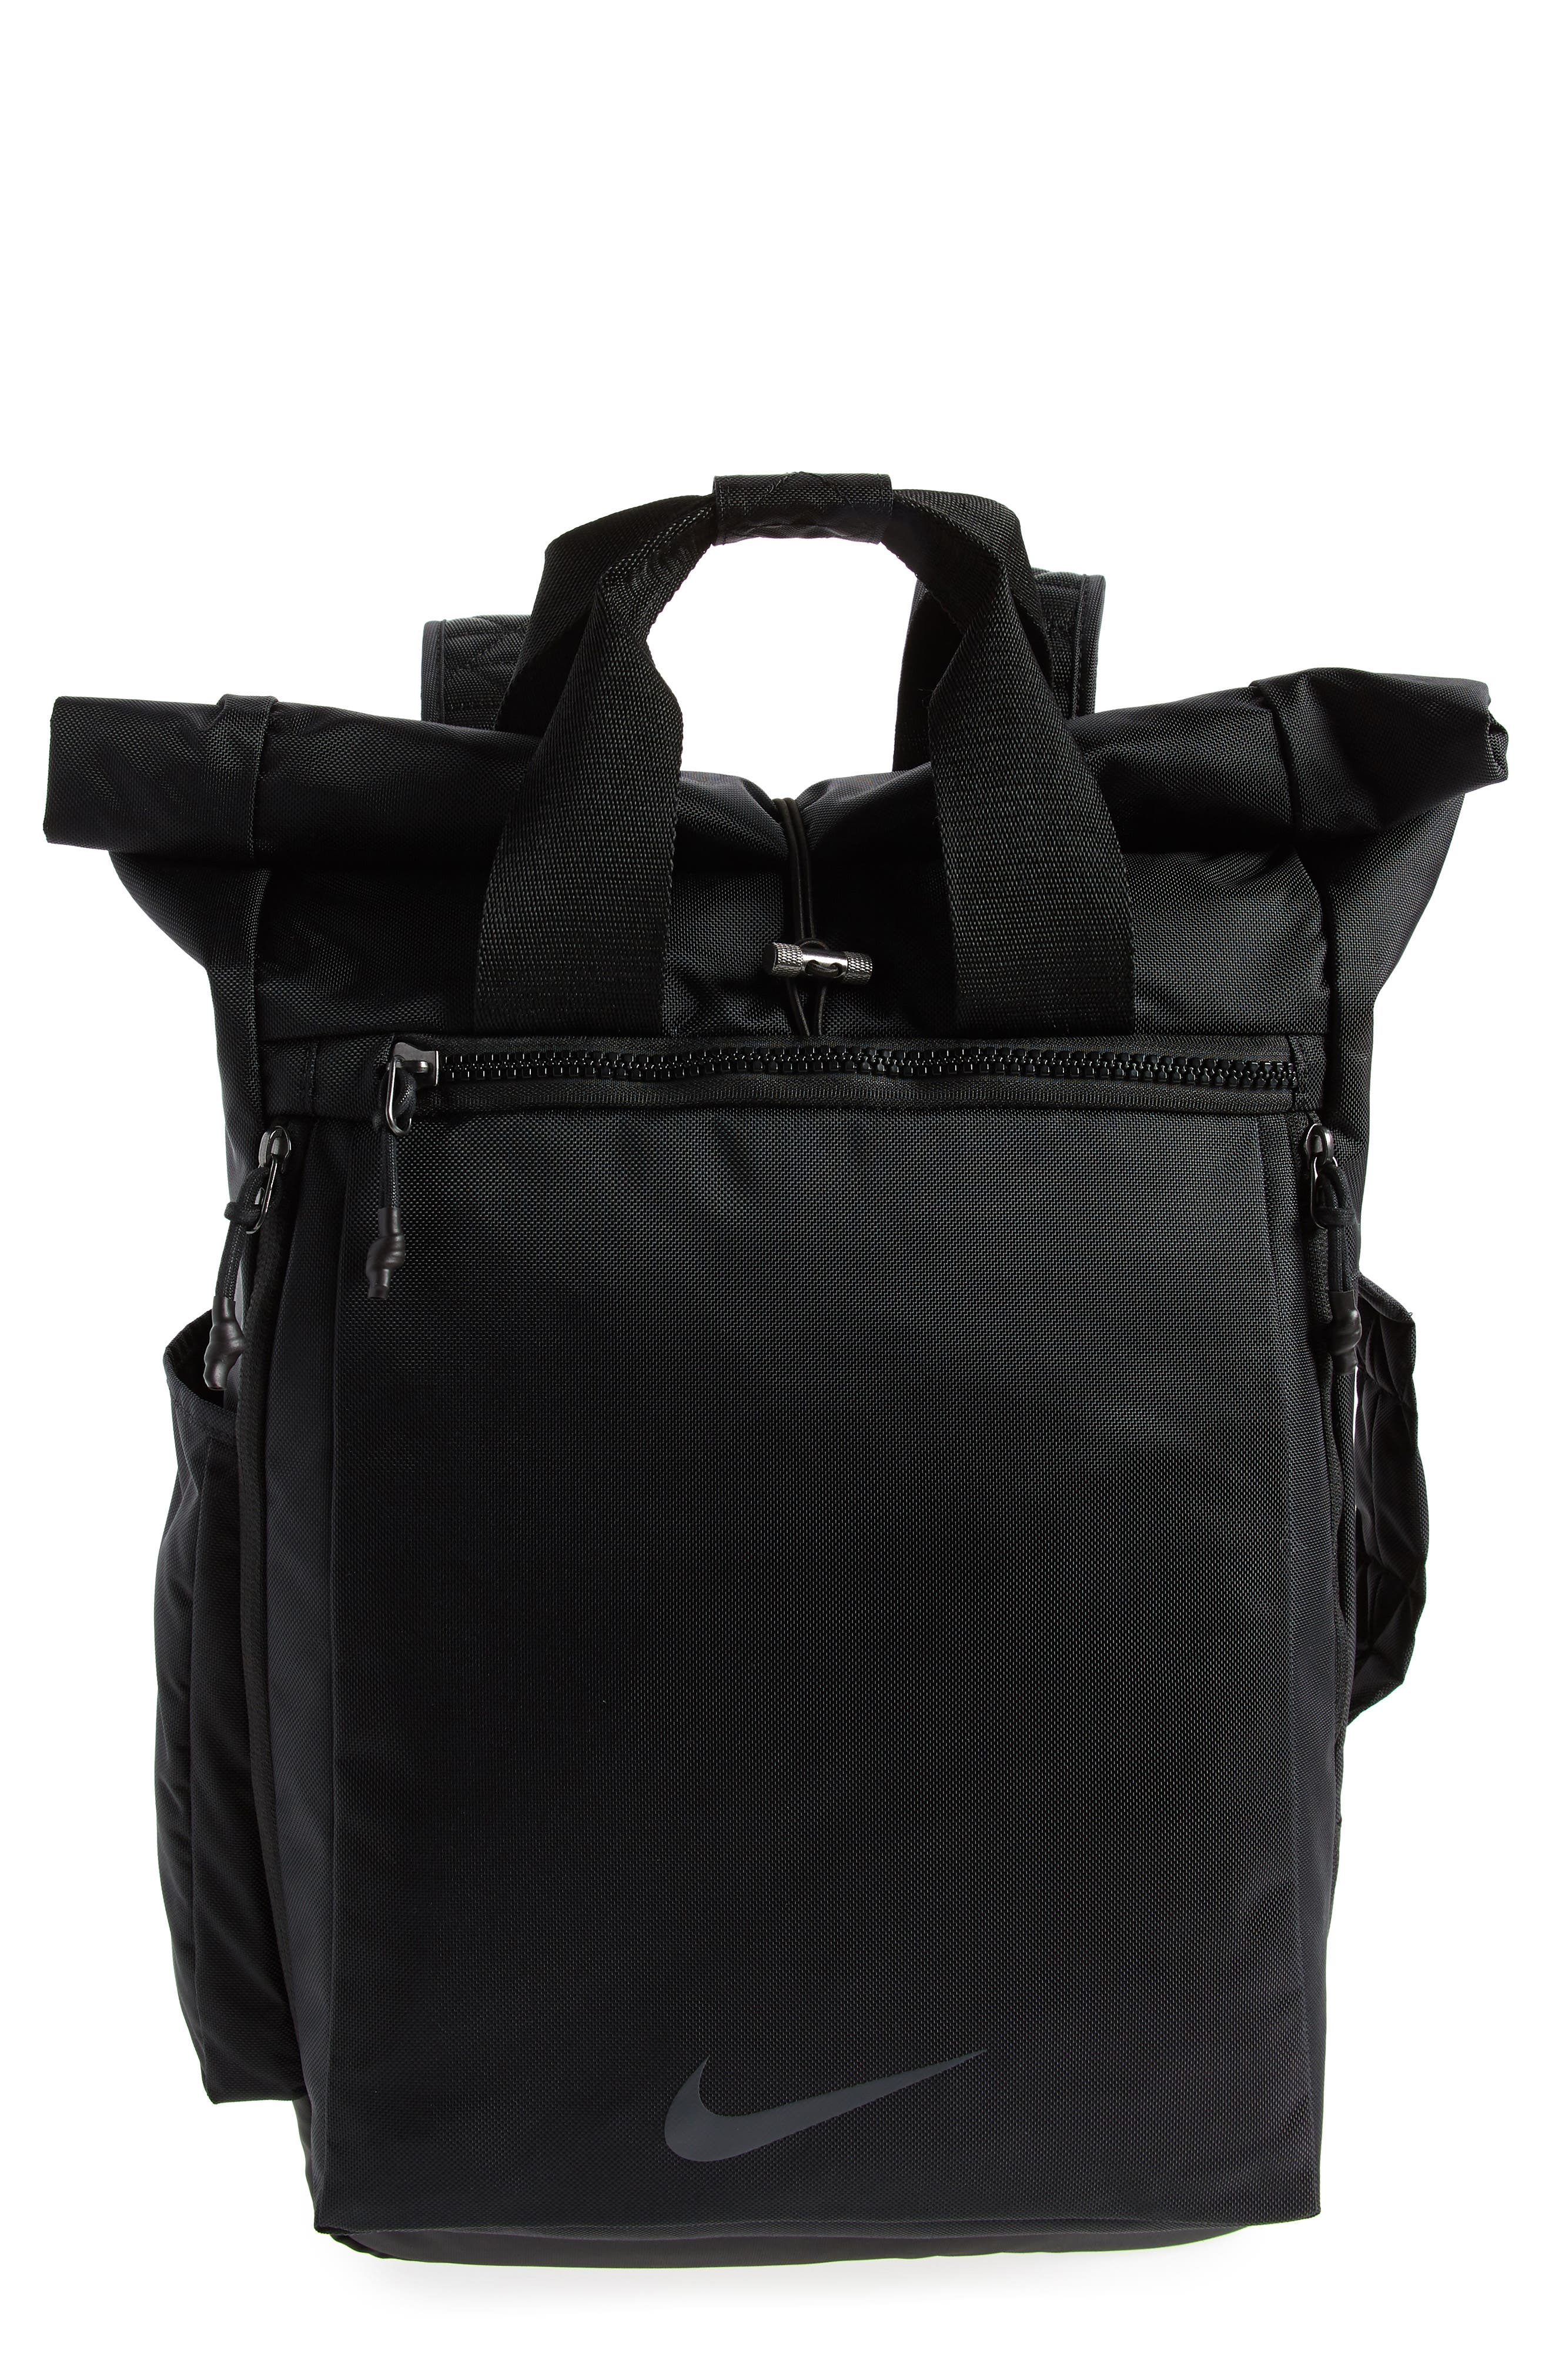 nike bag with laptop compartment